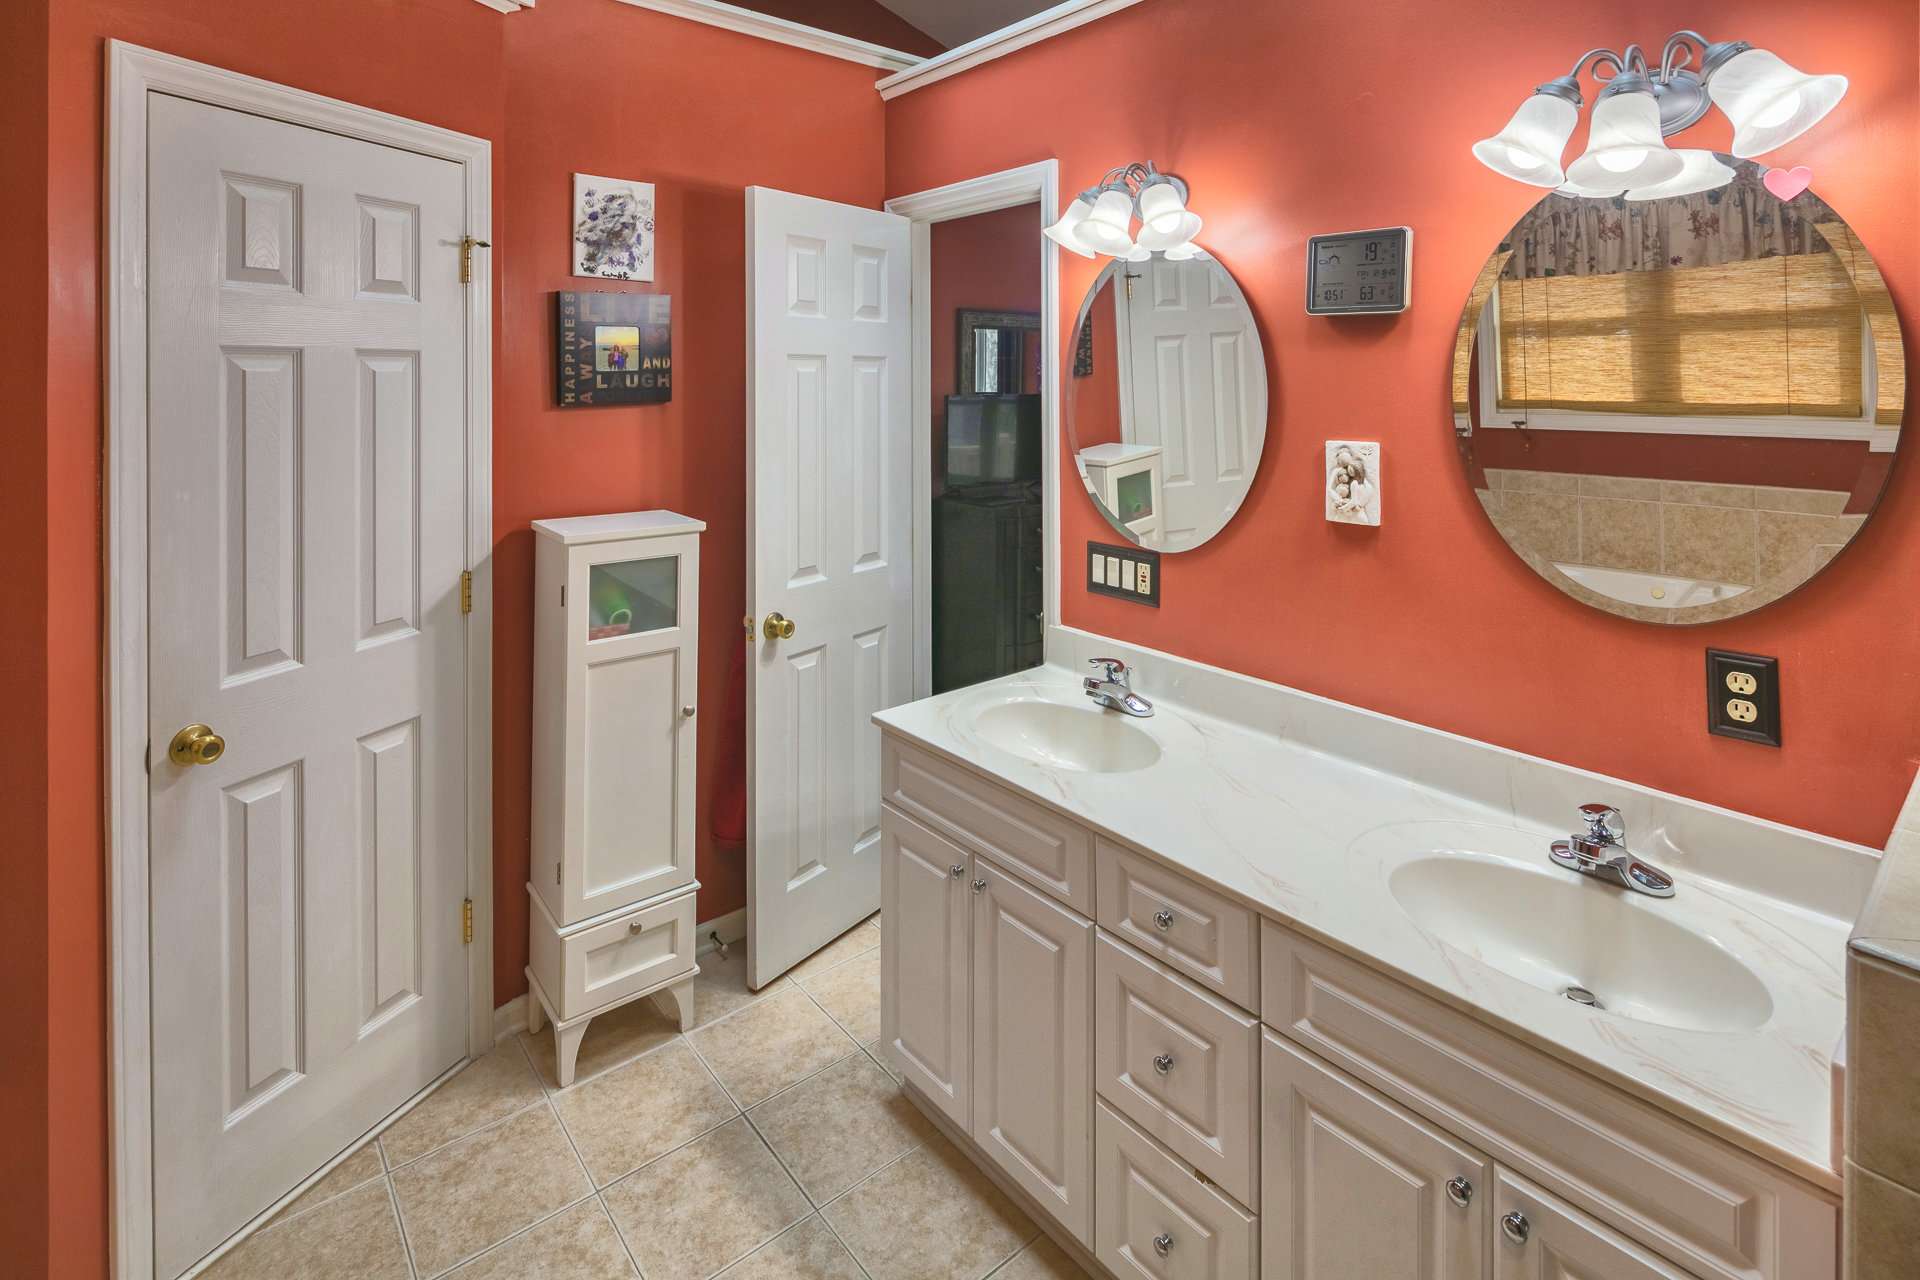 The master bath features a double vanity, walk-in shower, and a jetted tub.